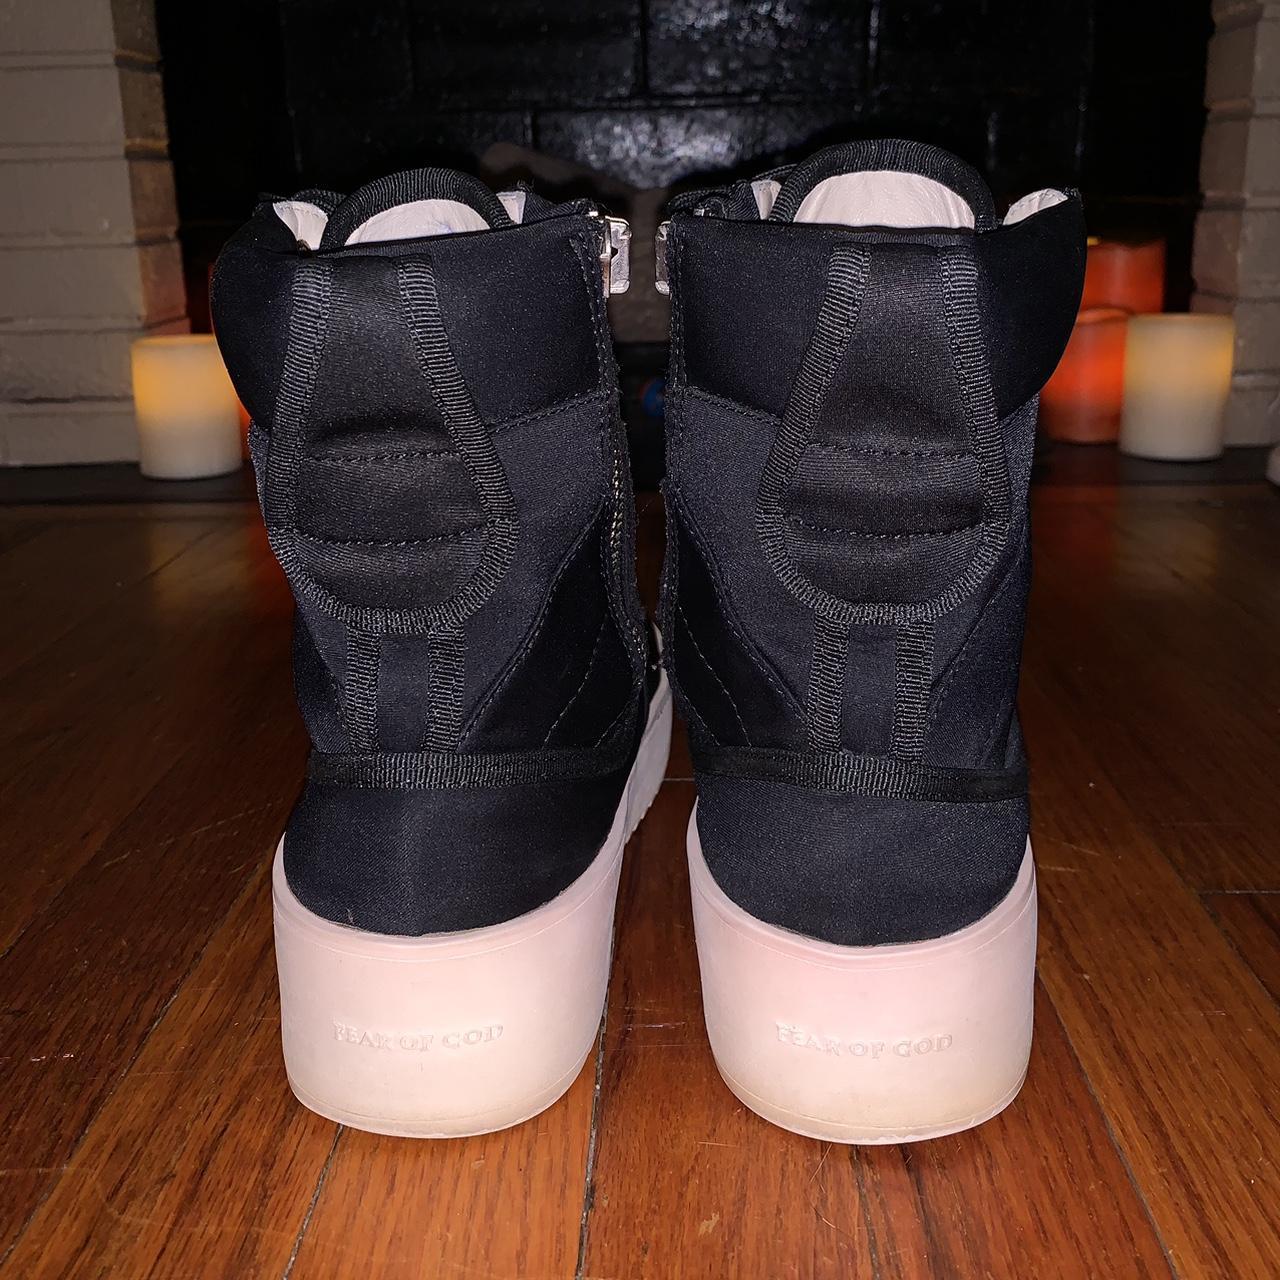 Fear of God Men's Black and White Trainers (2)